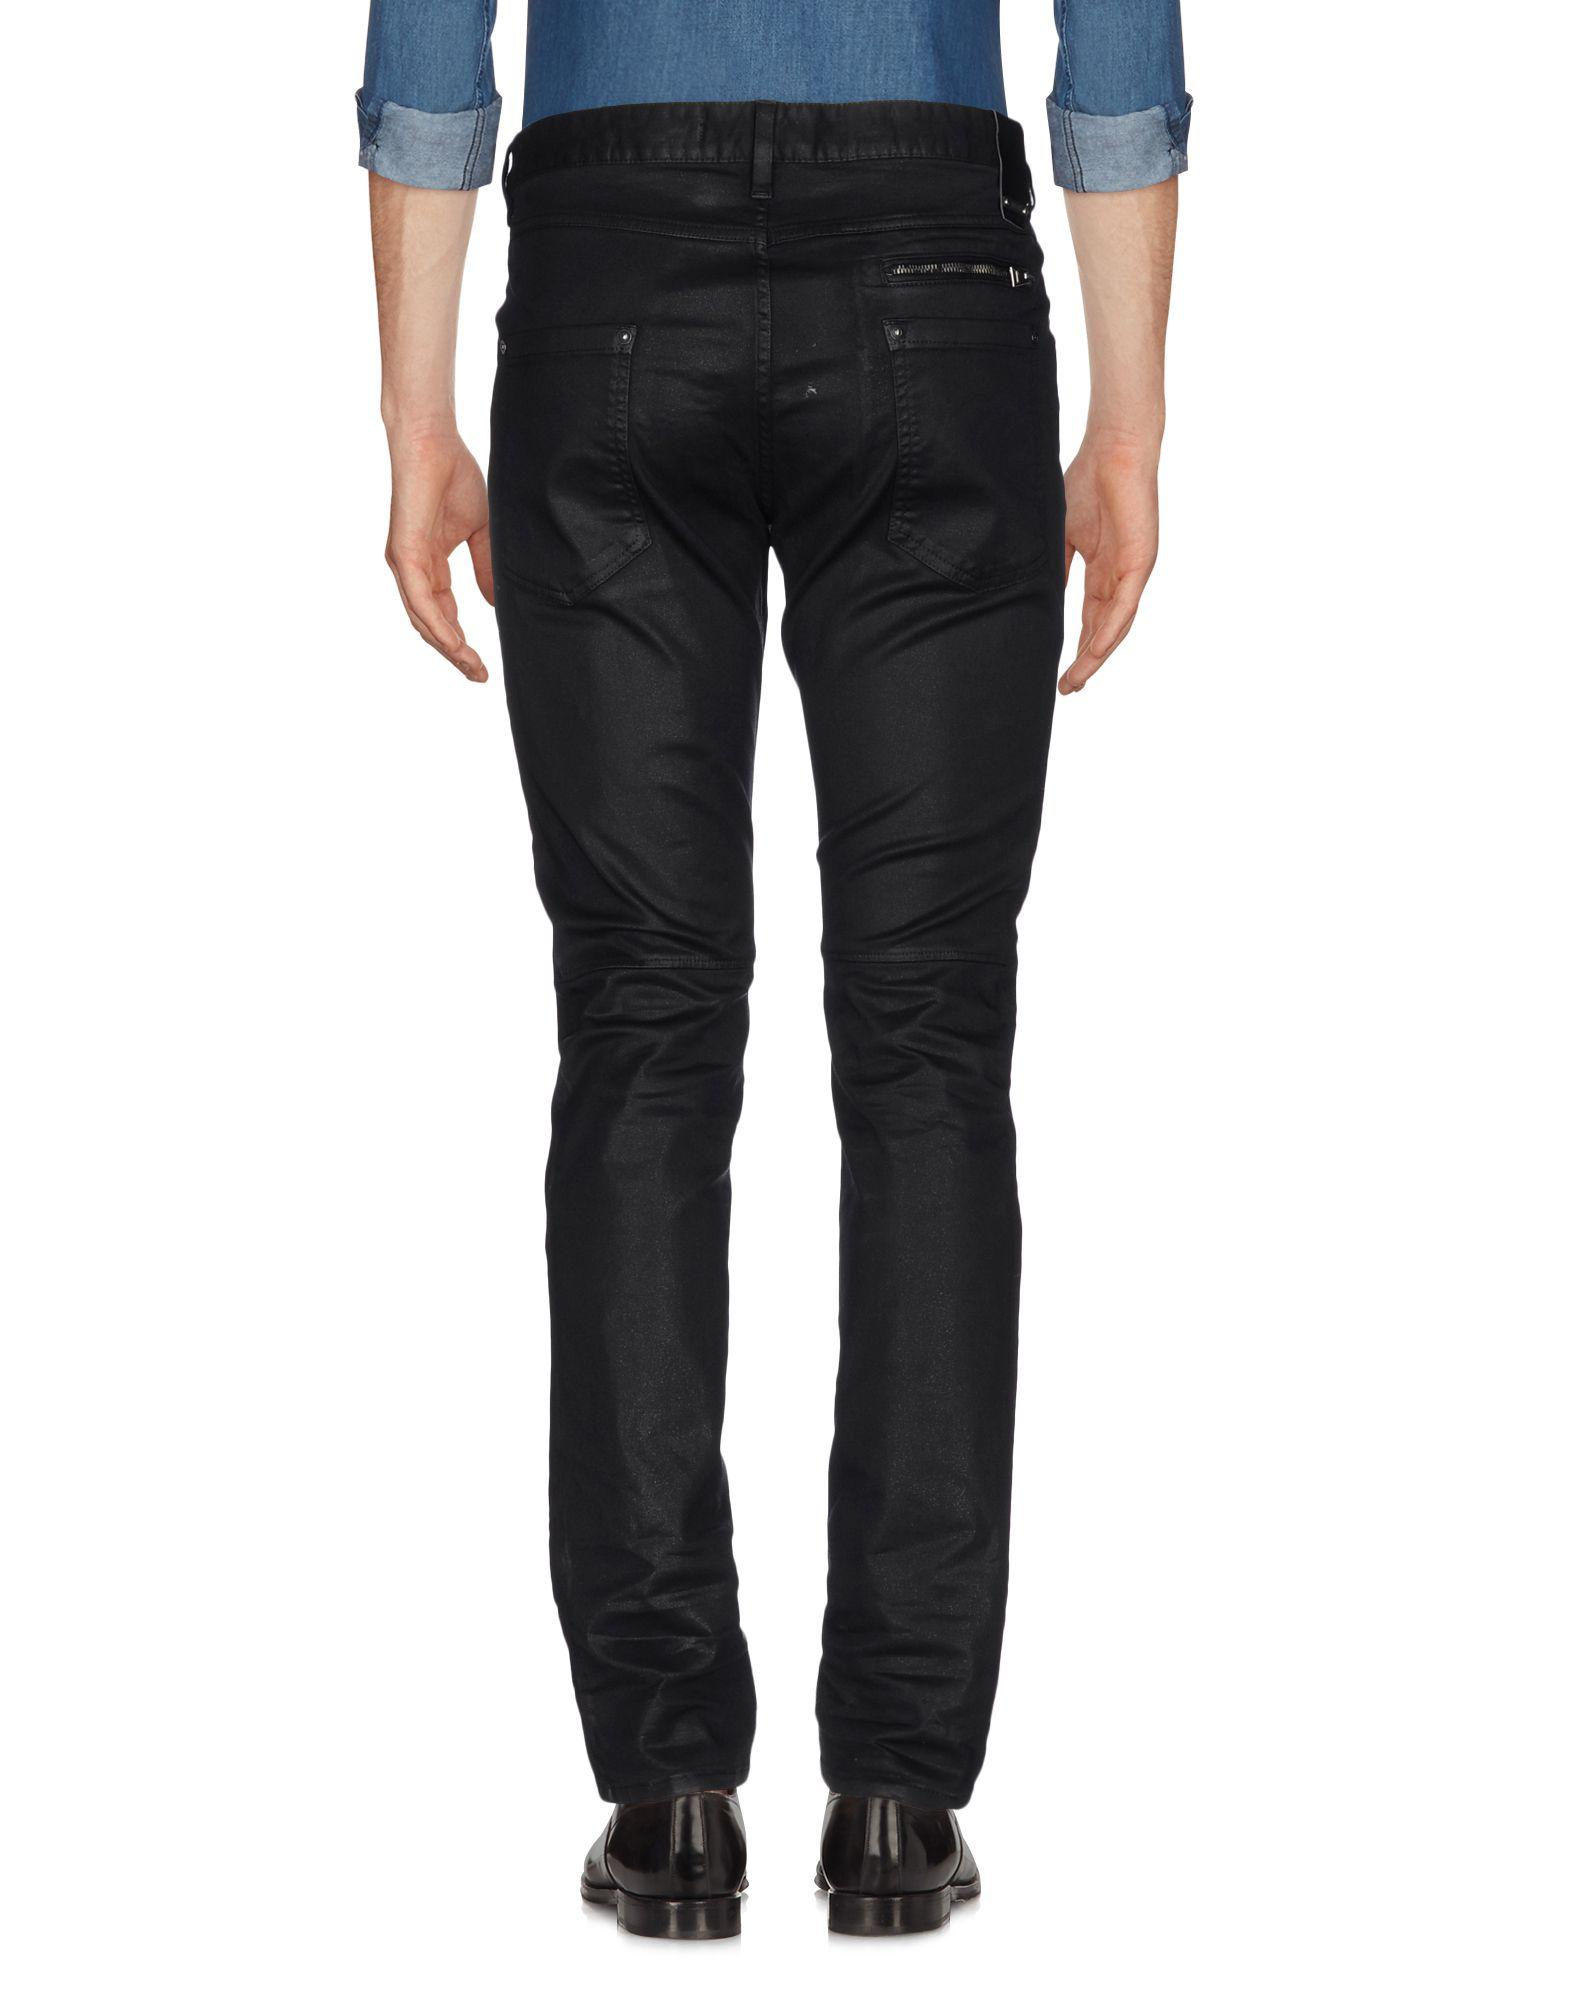 Just Cavalli Cotton Casual Pants in Black for Men - Lyst